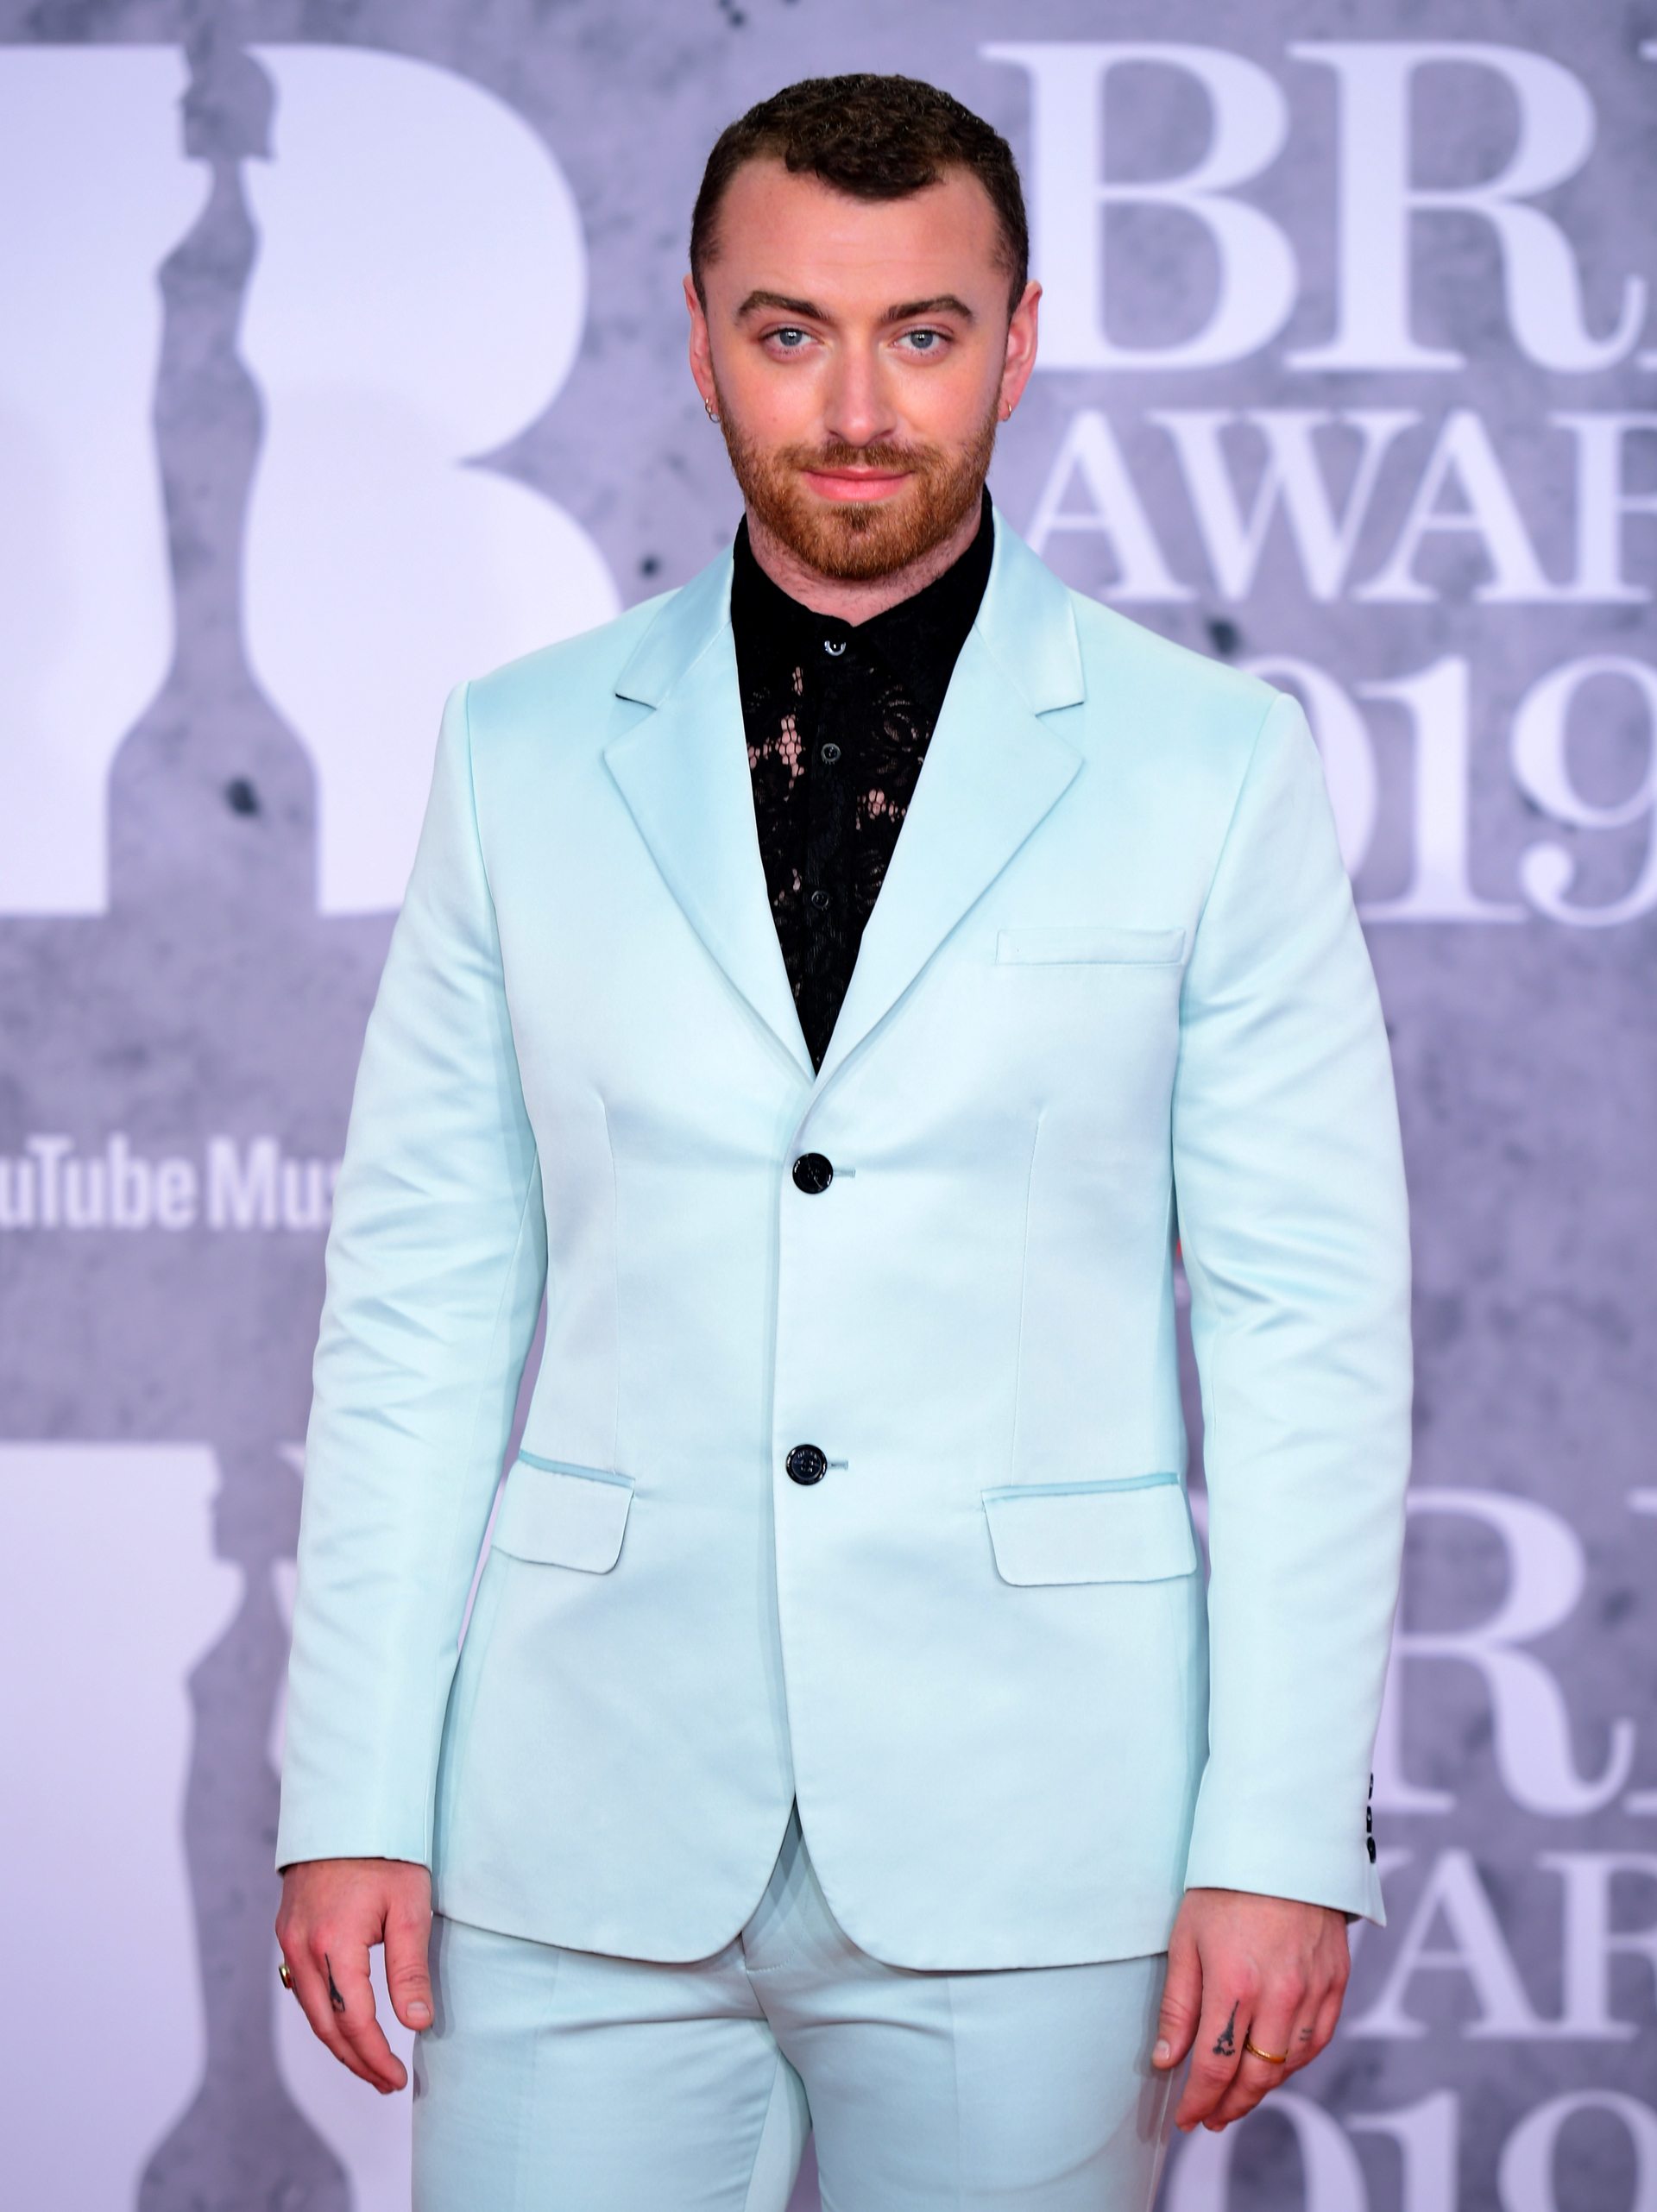 Music industry can be a bit homophobic, sexist: Sam Smith